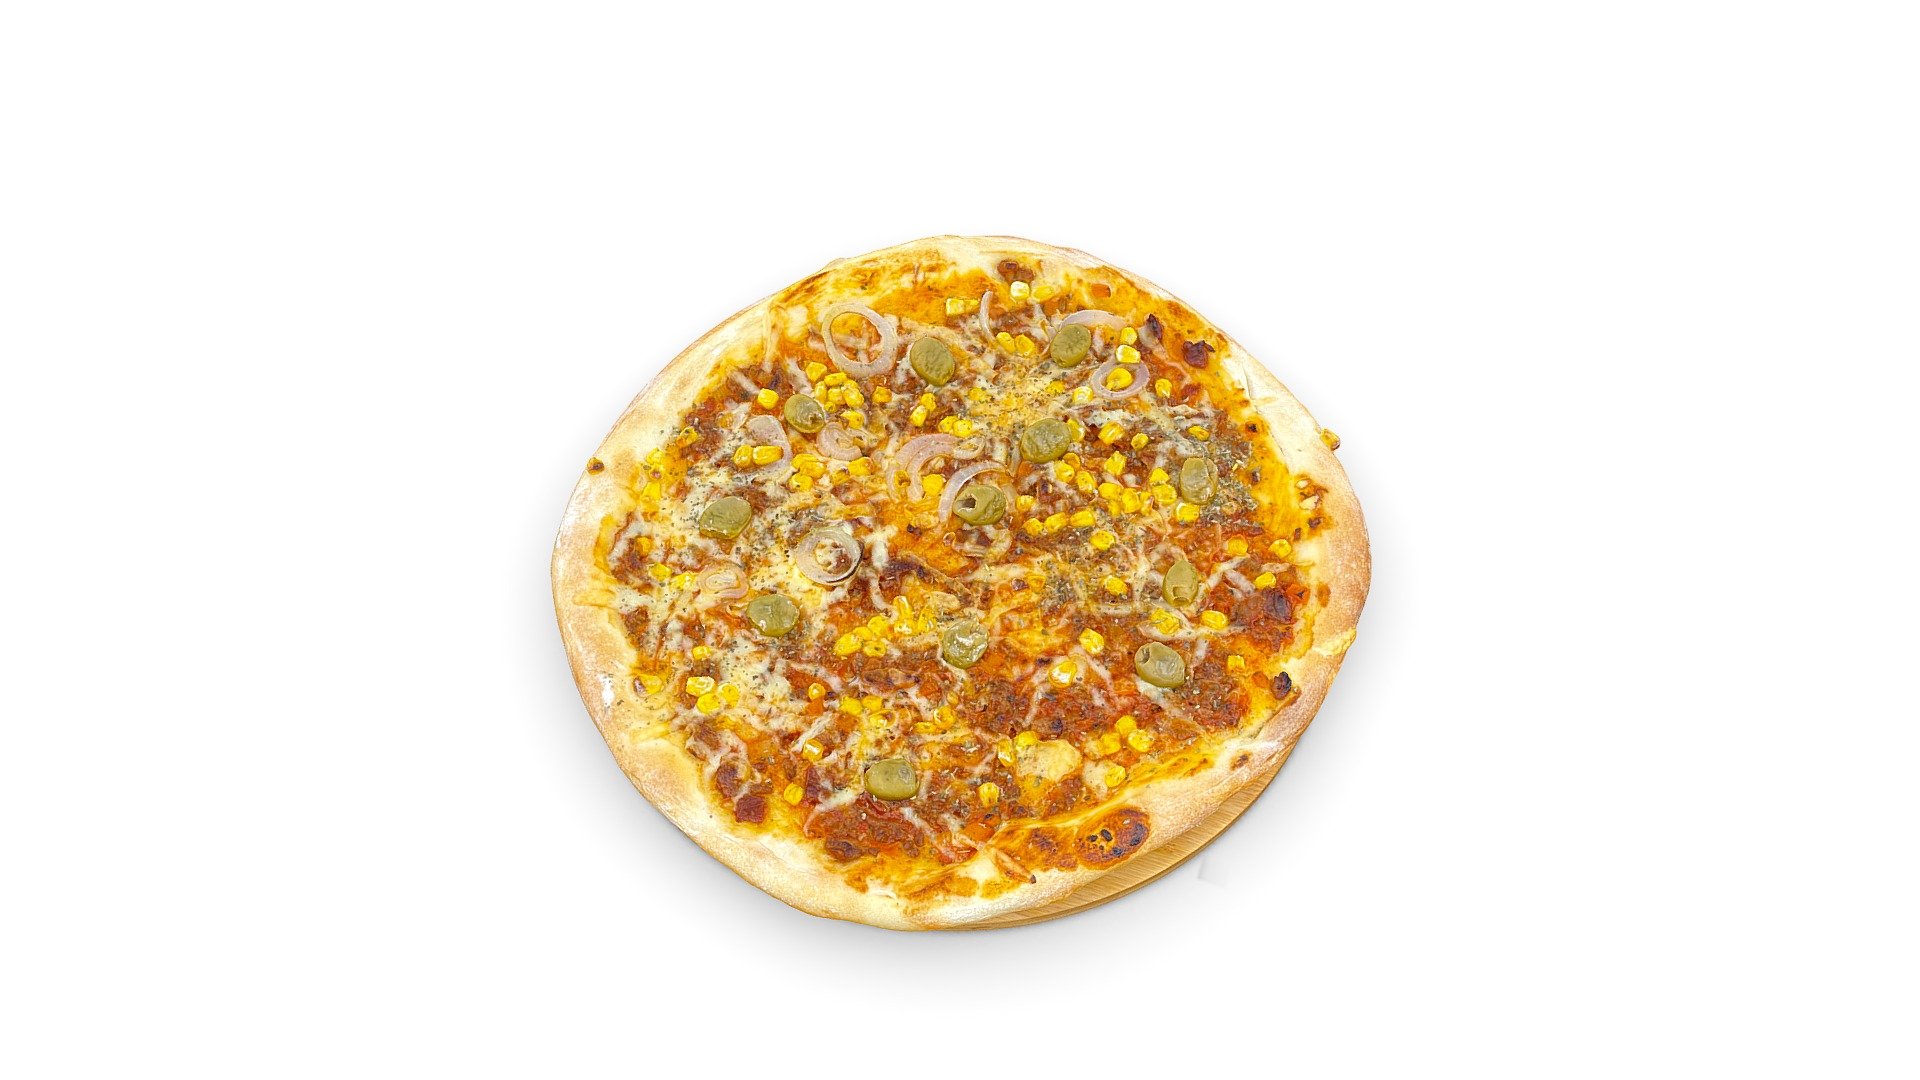 Bolognese Pizza with bologense sauce, corn, onion, olive, oregano, cheese. This is a homemade pizza dough, softer and crispier in compared to my previous pizza. 

more info:




View my Metaverse/AR/VR recipes on. Zoltanfood

Support me on. Patreon

Find me on. Opensea
 - Bolognese Pizza - 3D model by Zoltanfood 3d model